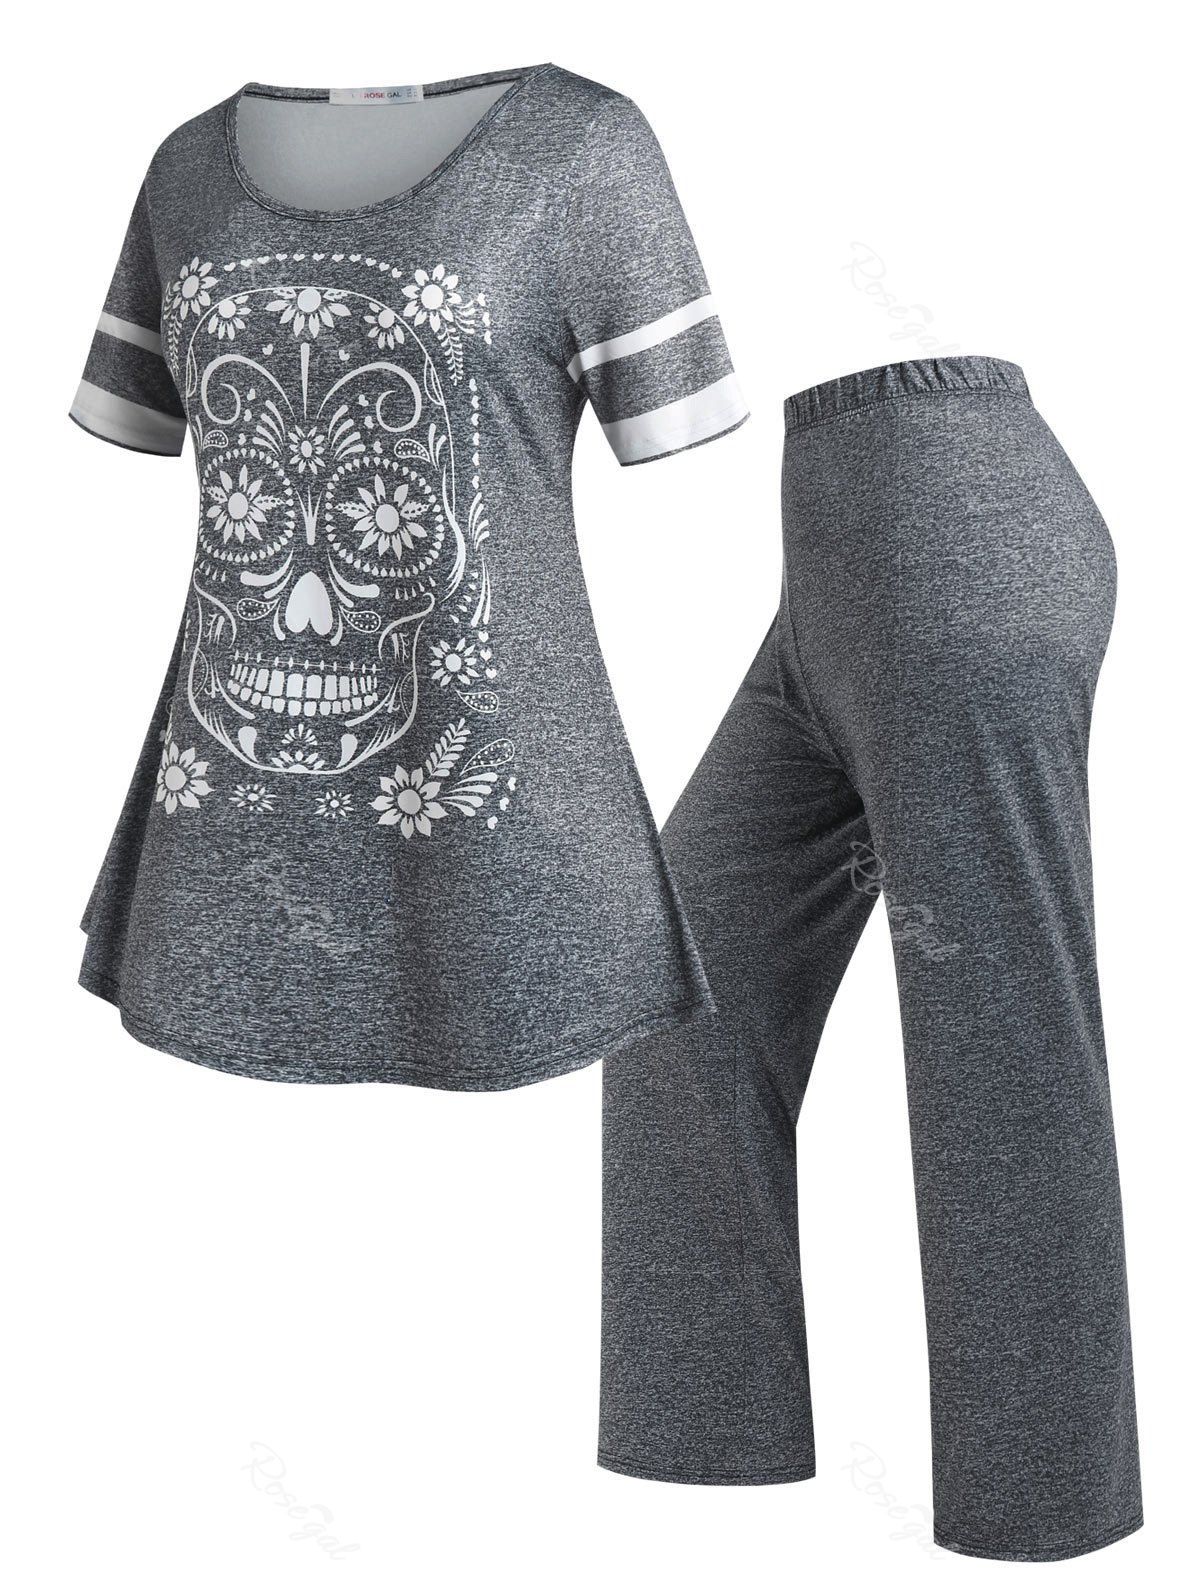 Discount Plus Size Space Dye Skull Pajama T-shirt and Pants Set  